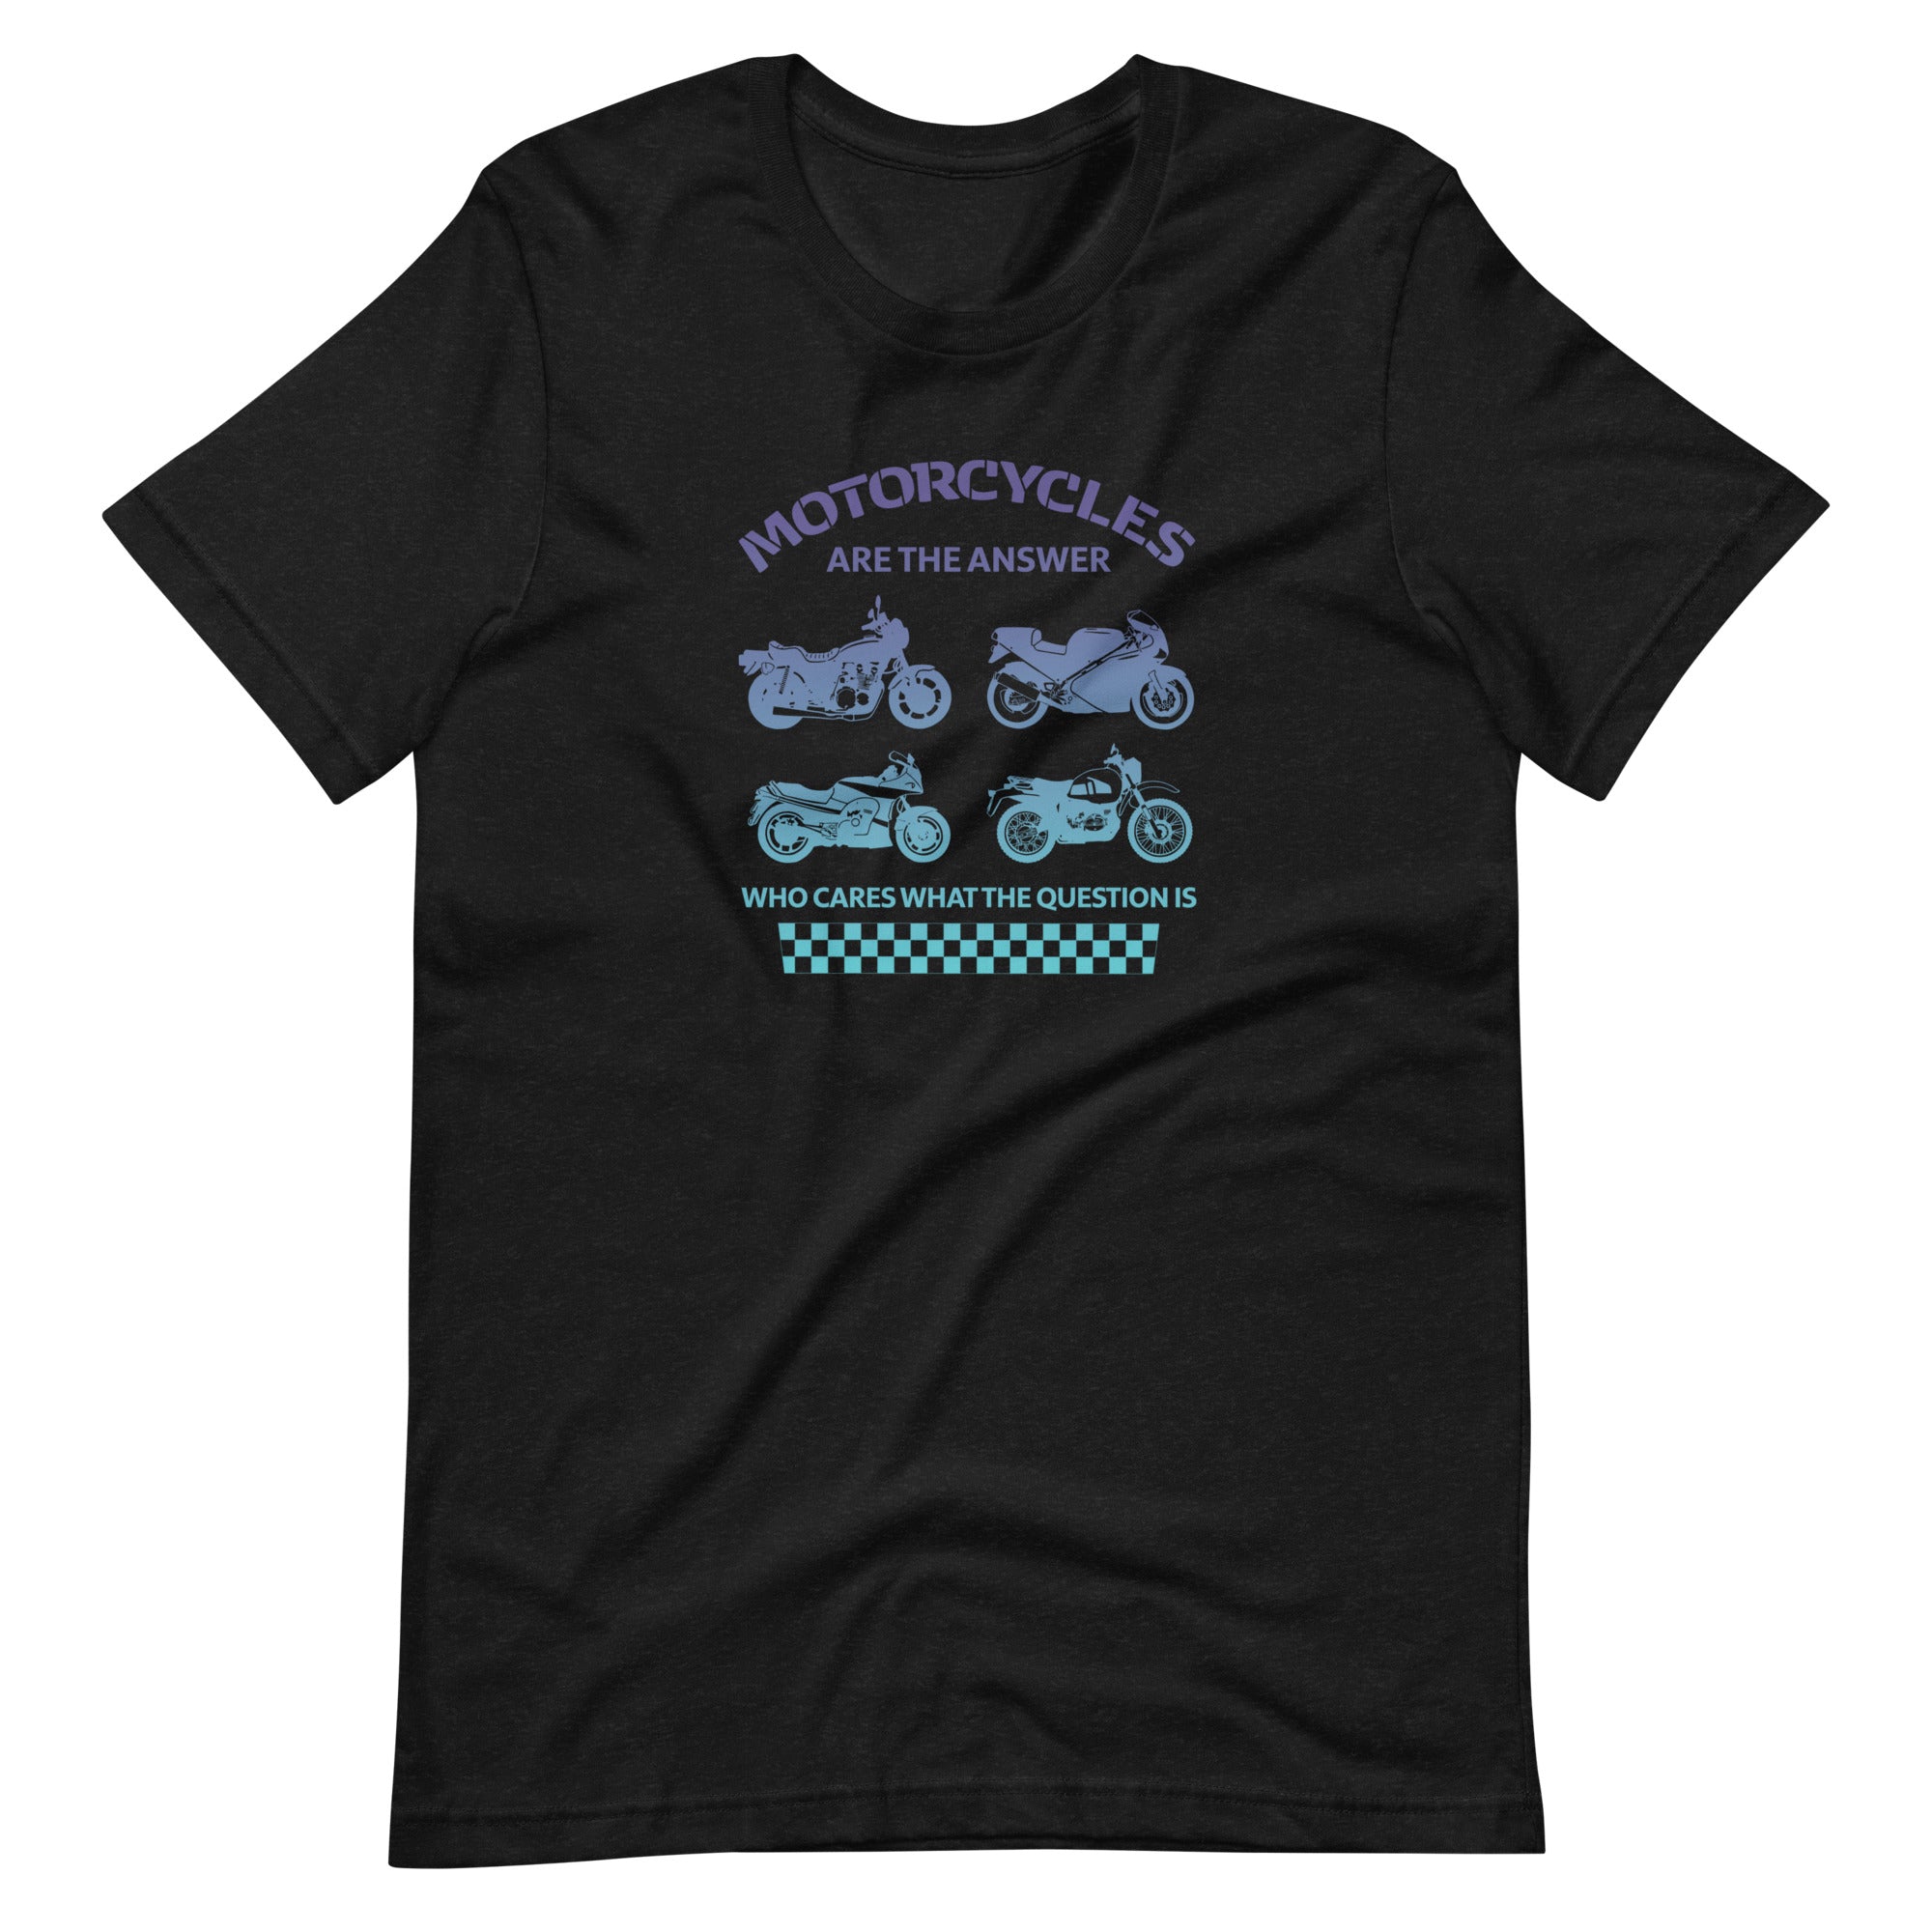 "Motorcycles Are the Answer" Tee Shirt - Blue Gradient